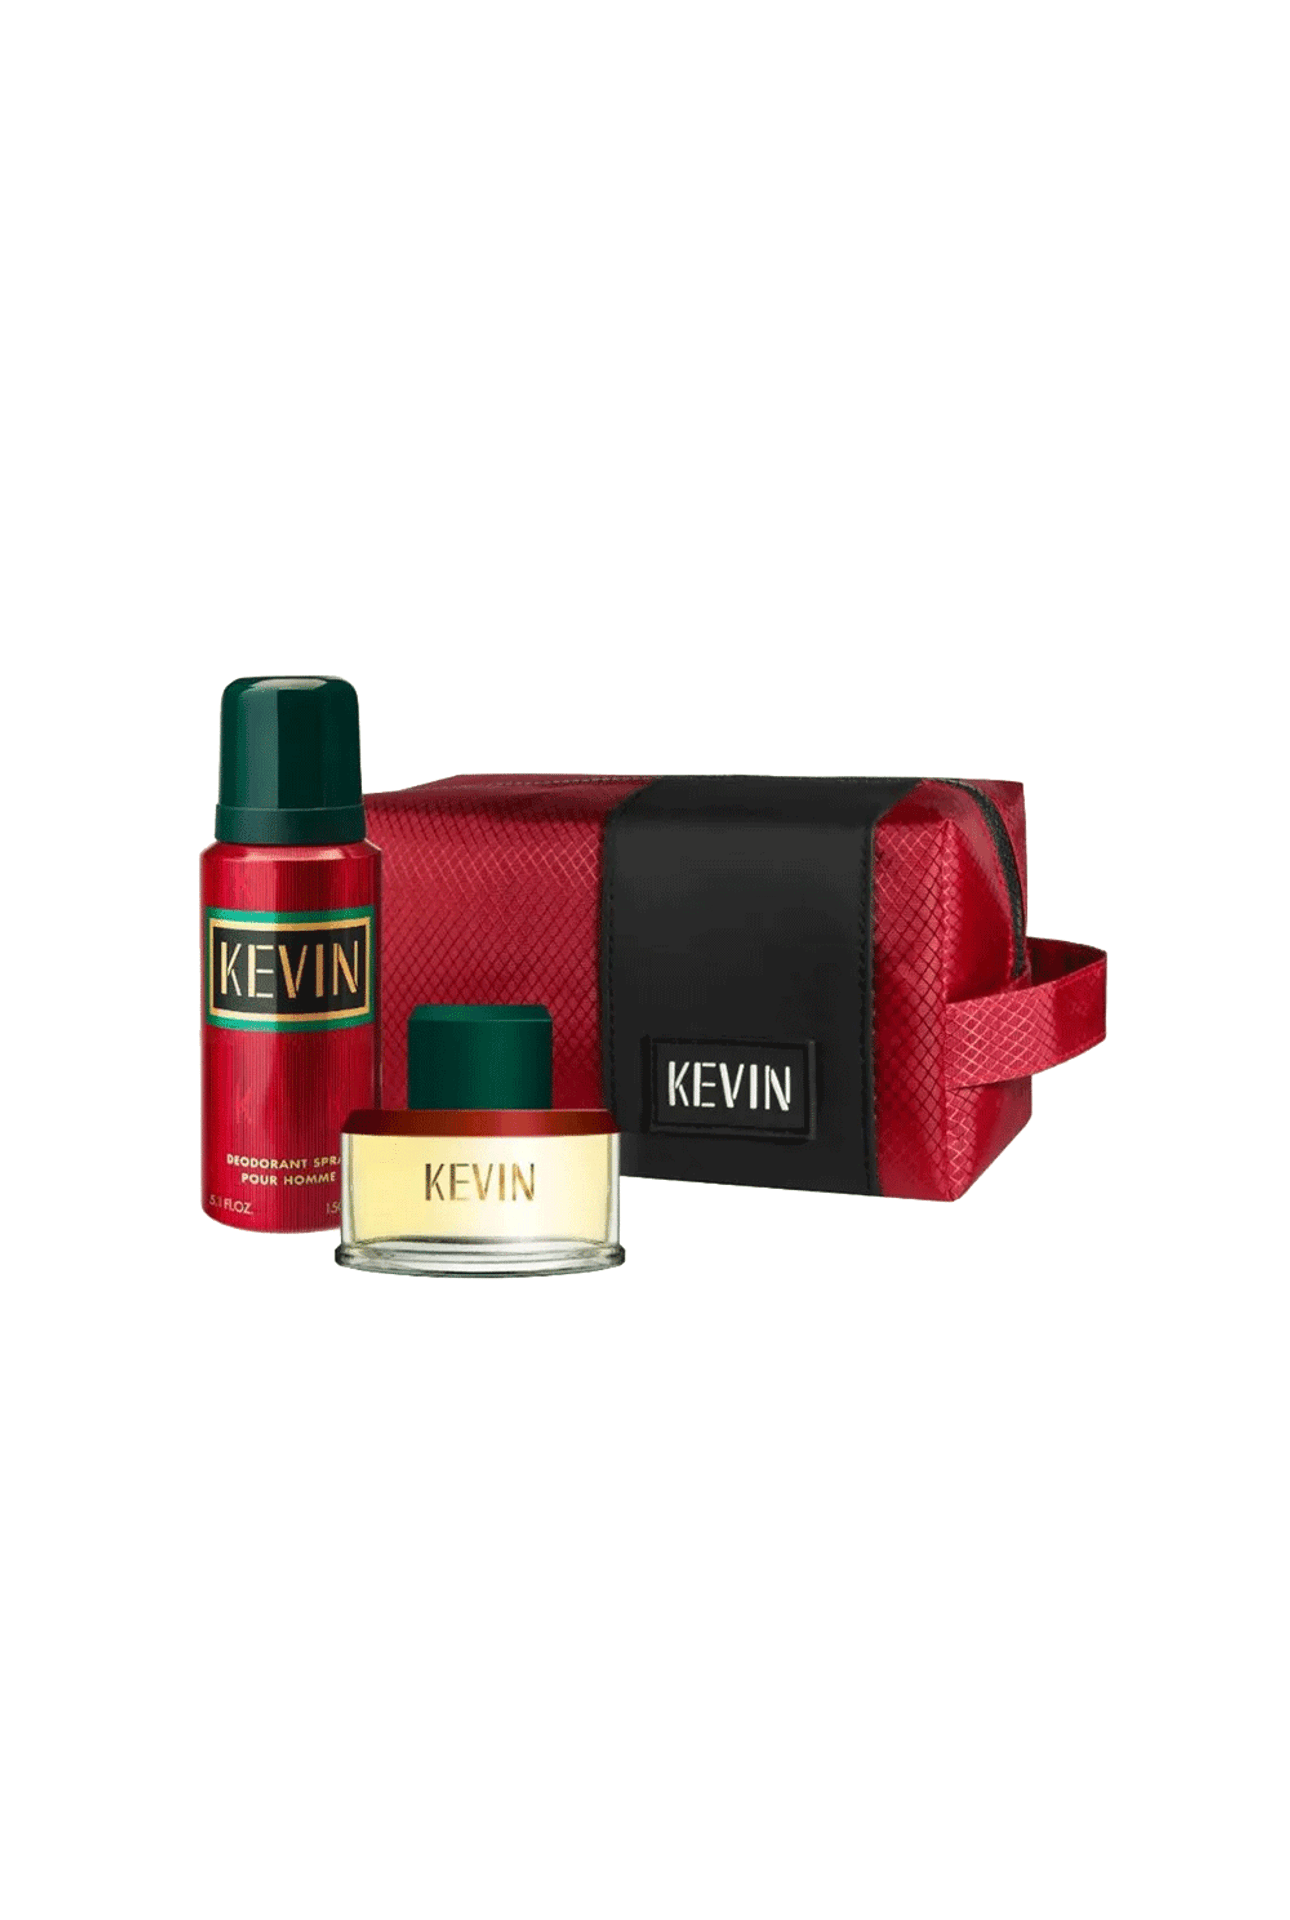 Kevin-Estuche-Kevin-Edt-x-60-ml---Deo-7791600161217_img1